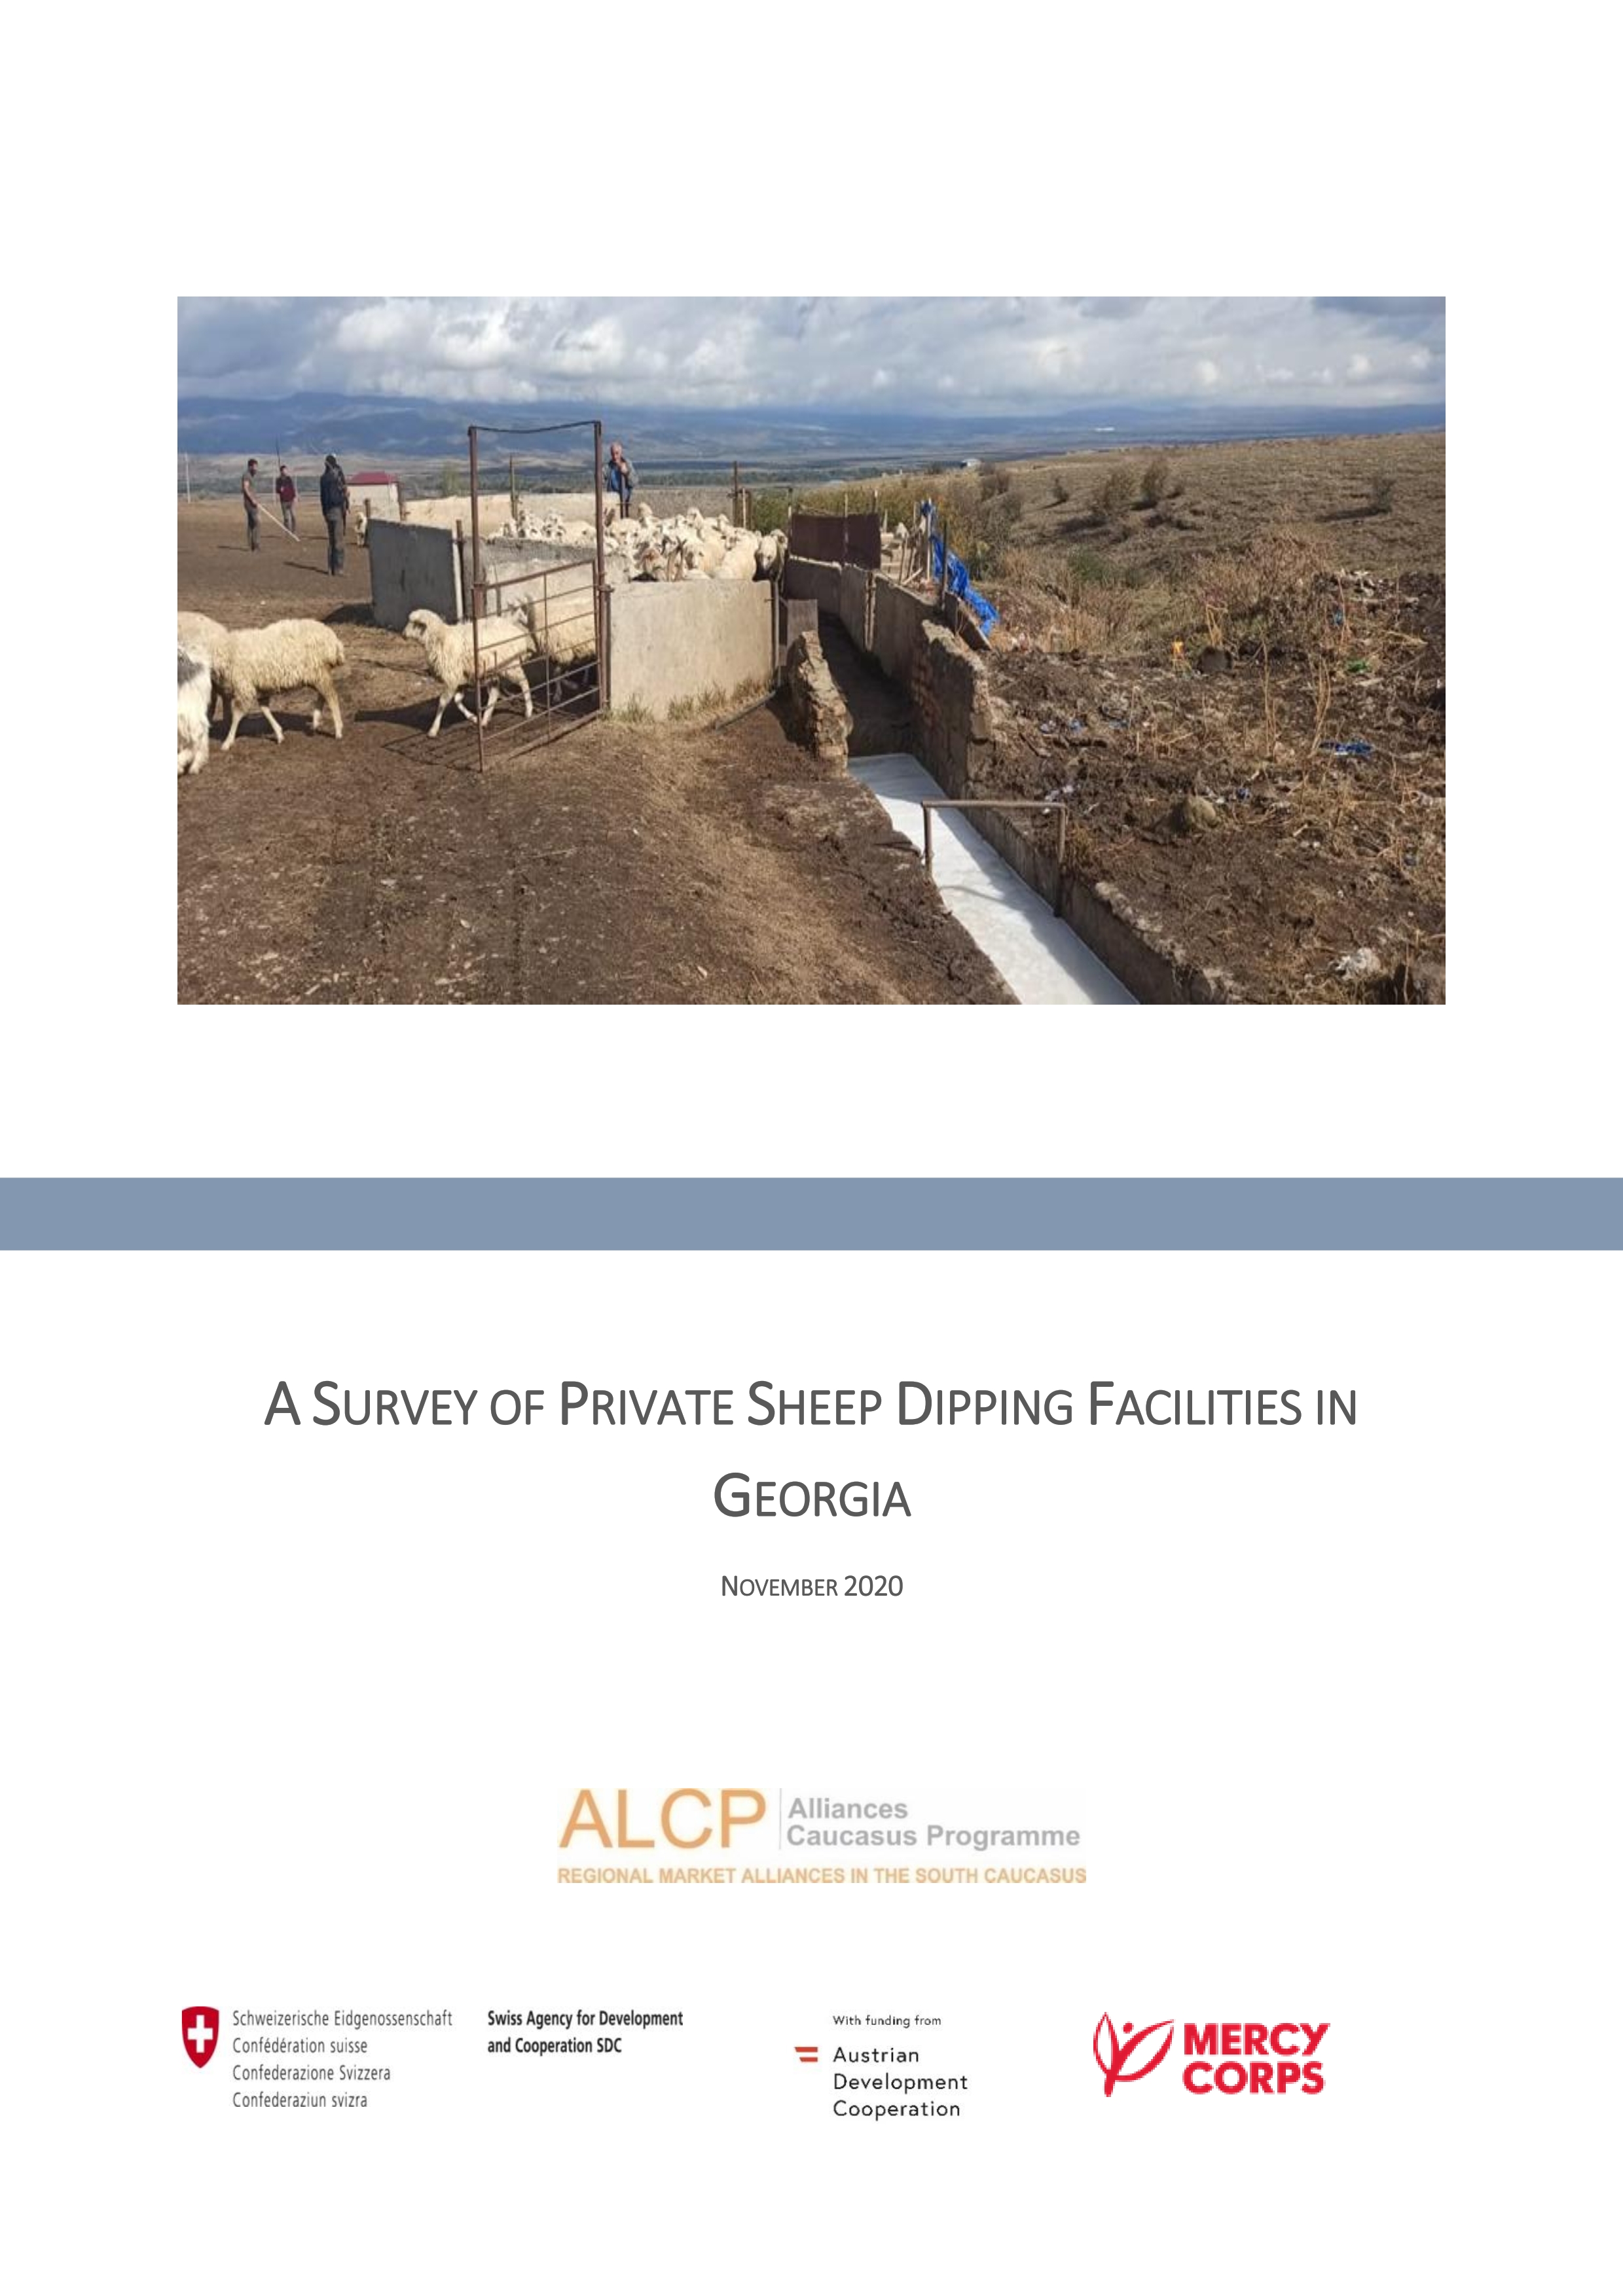 A Survey of Private Sheep Dipping Facilities